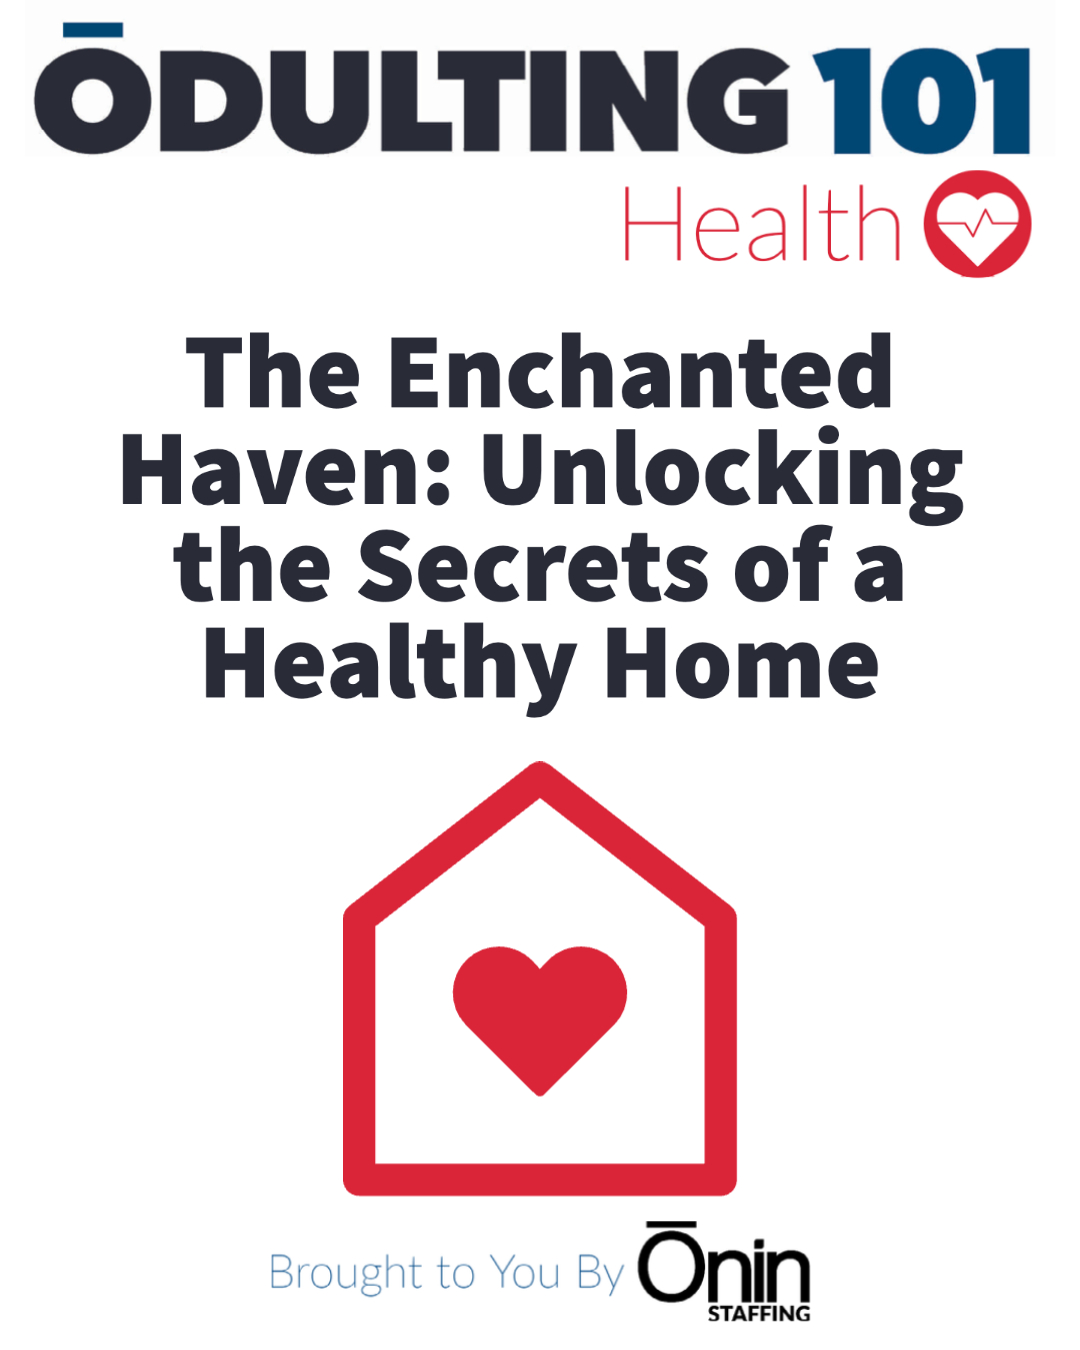 Image featuring the title 'The Enchanted Haven: Unlocking the Secrets of a Healthy Home' with Odulting logo, a line drawing of a red home with a heart, and 'Brought to you by Onin Staffing' text.